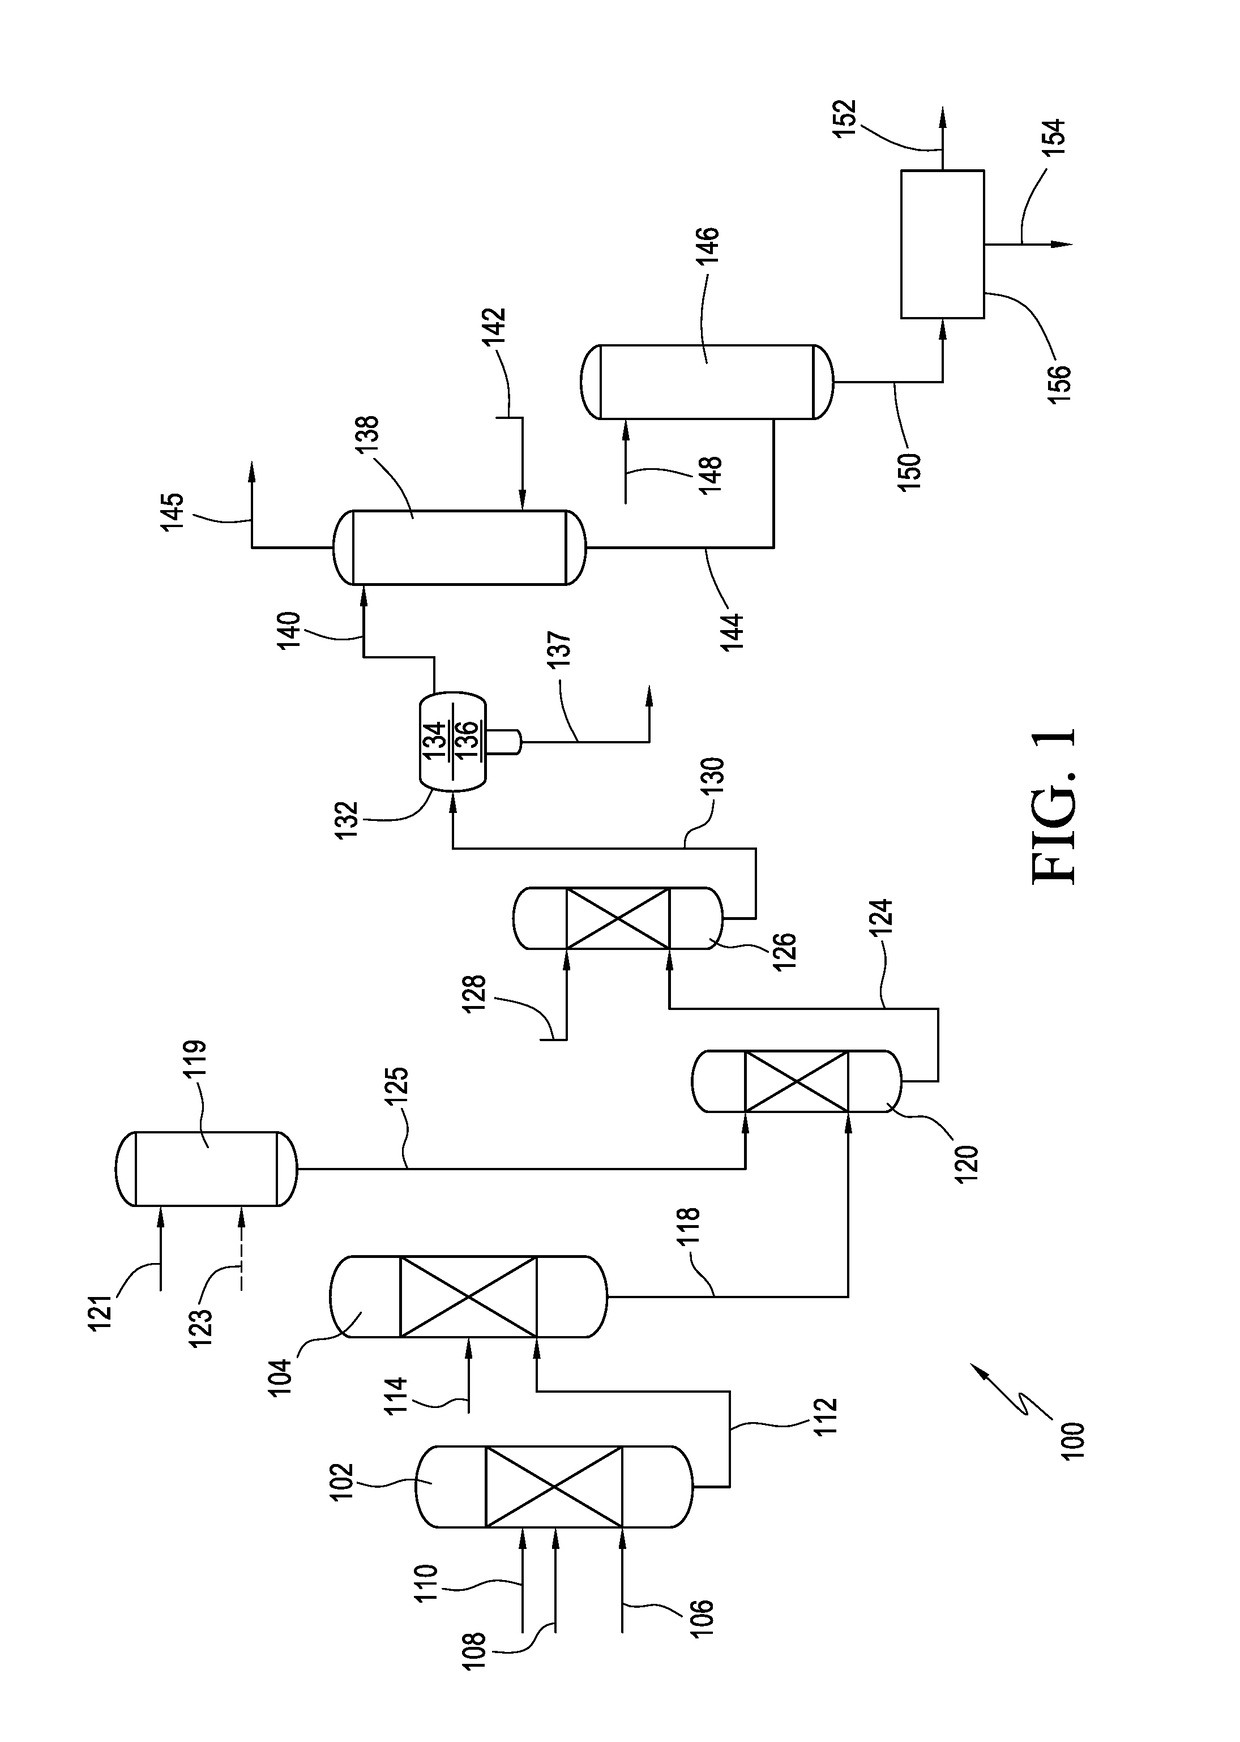 Acesulfame potassium compositions and processes for producing same